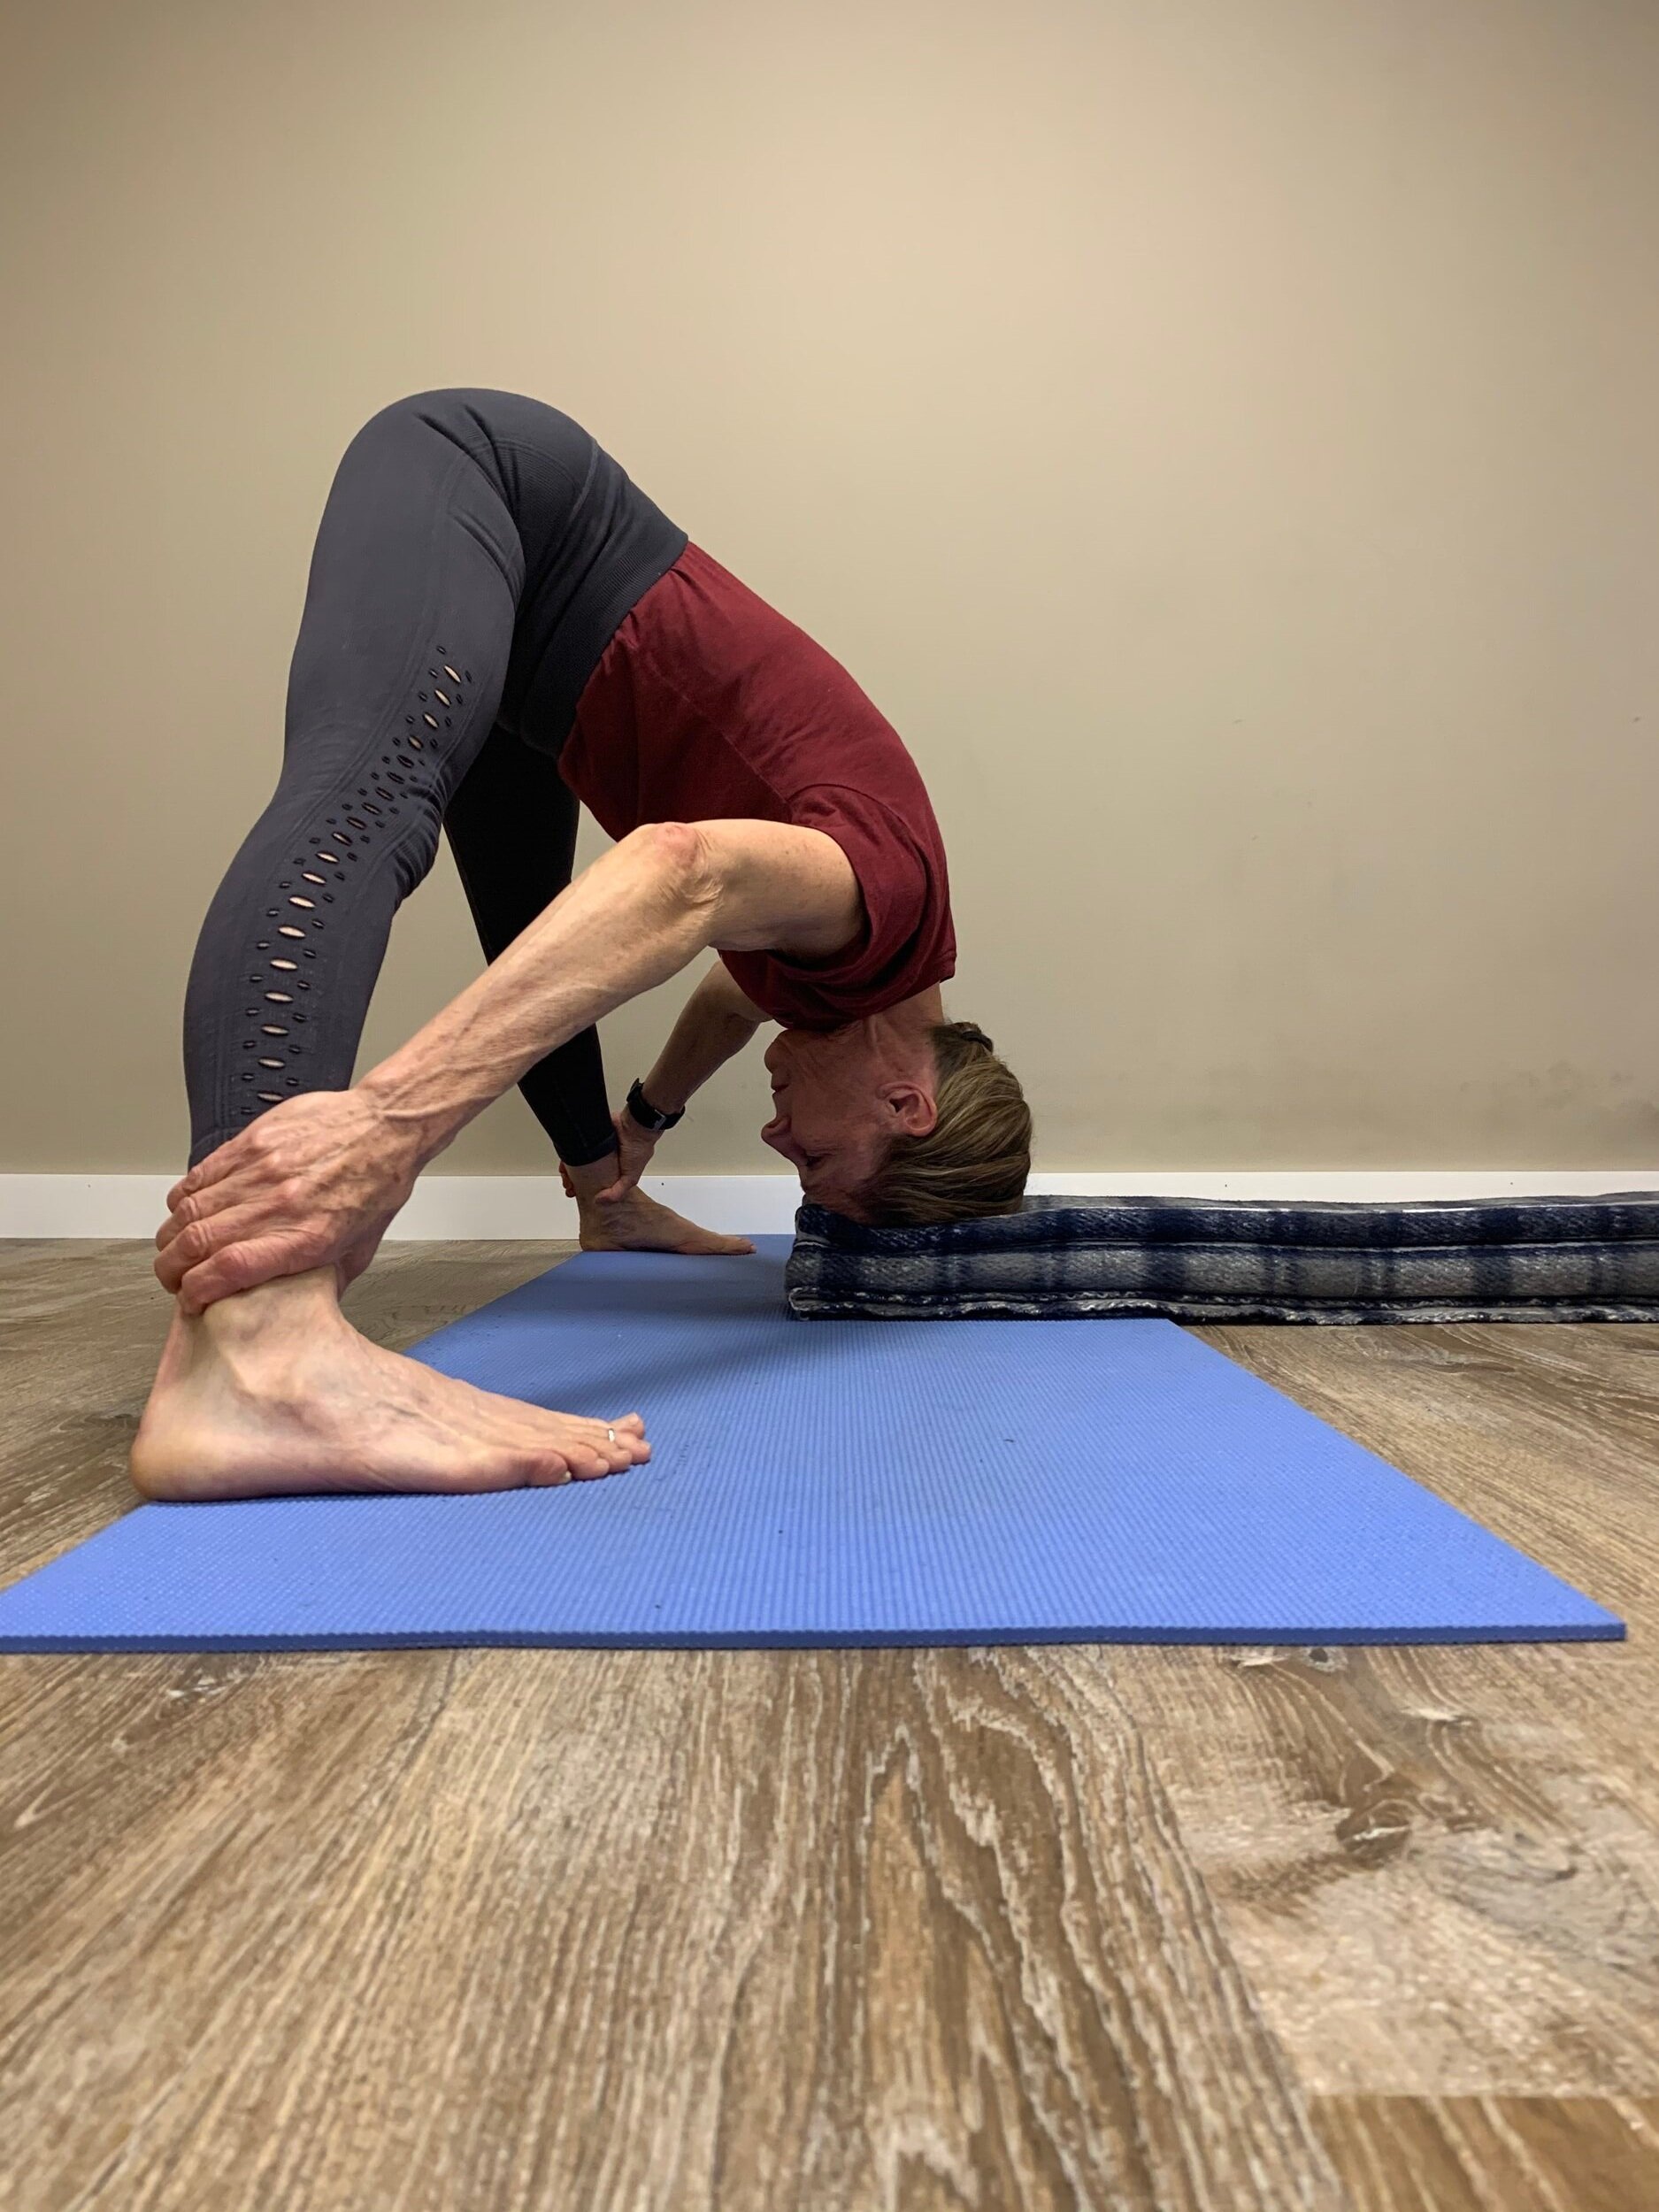 How to Practice Salamba Sirsasana (Supported Headstand) in Yoga?